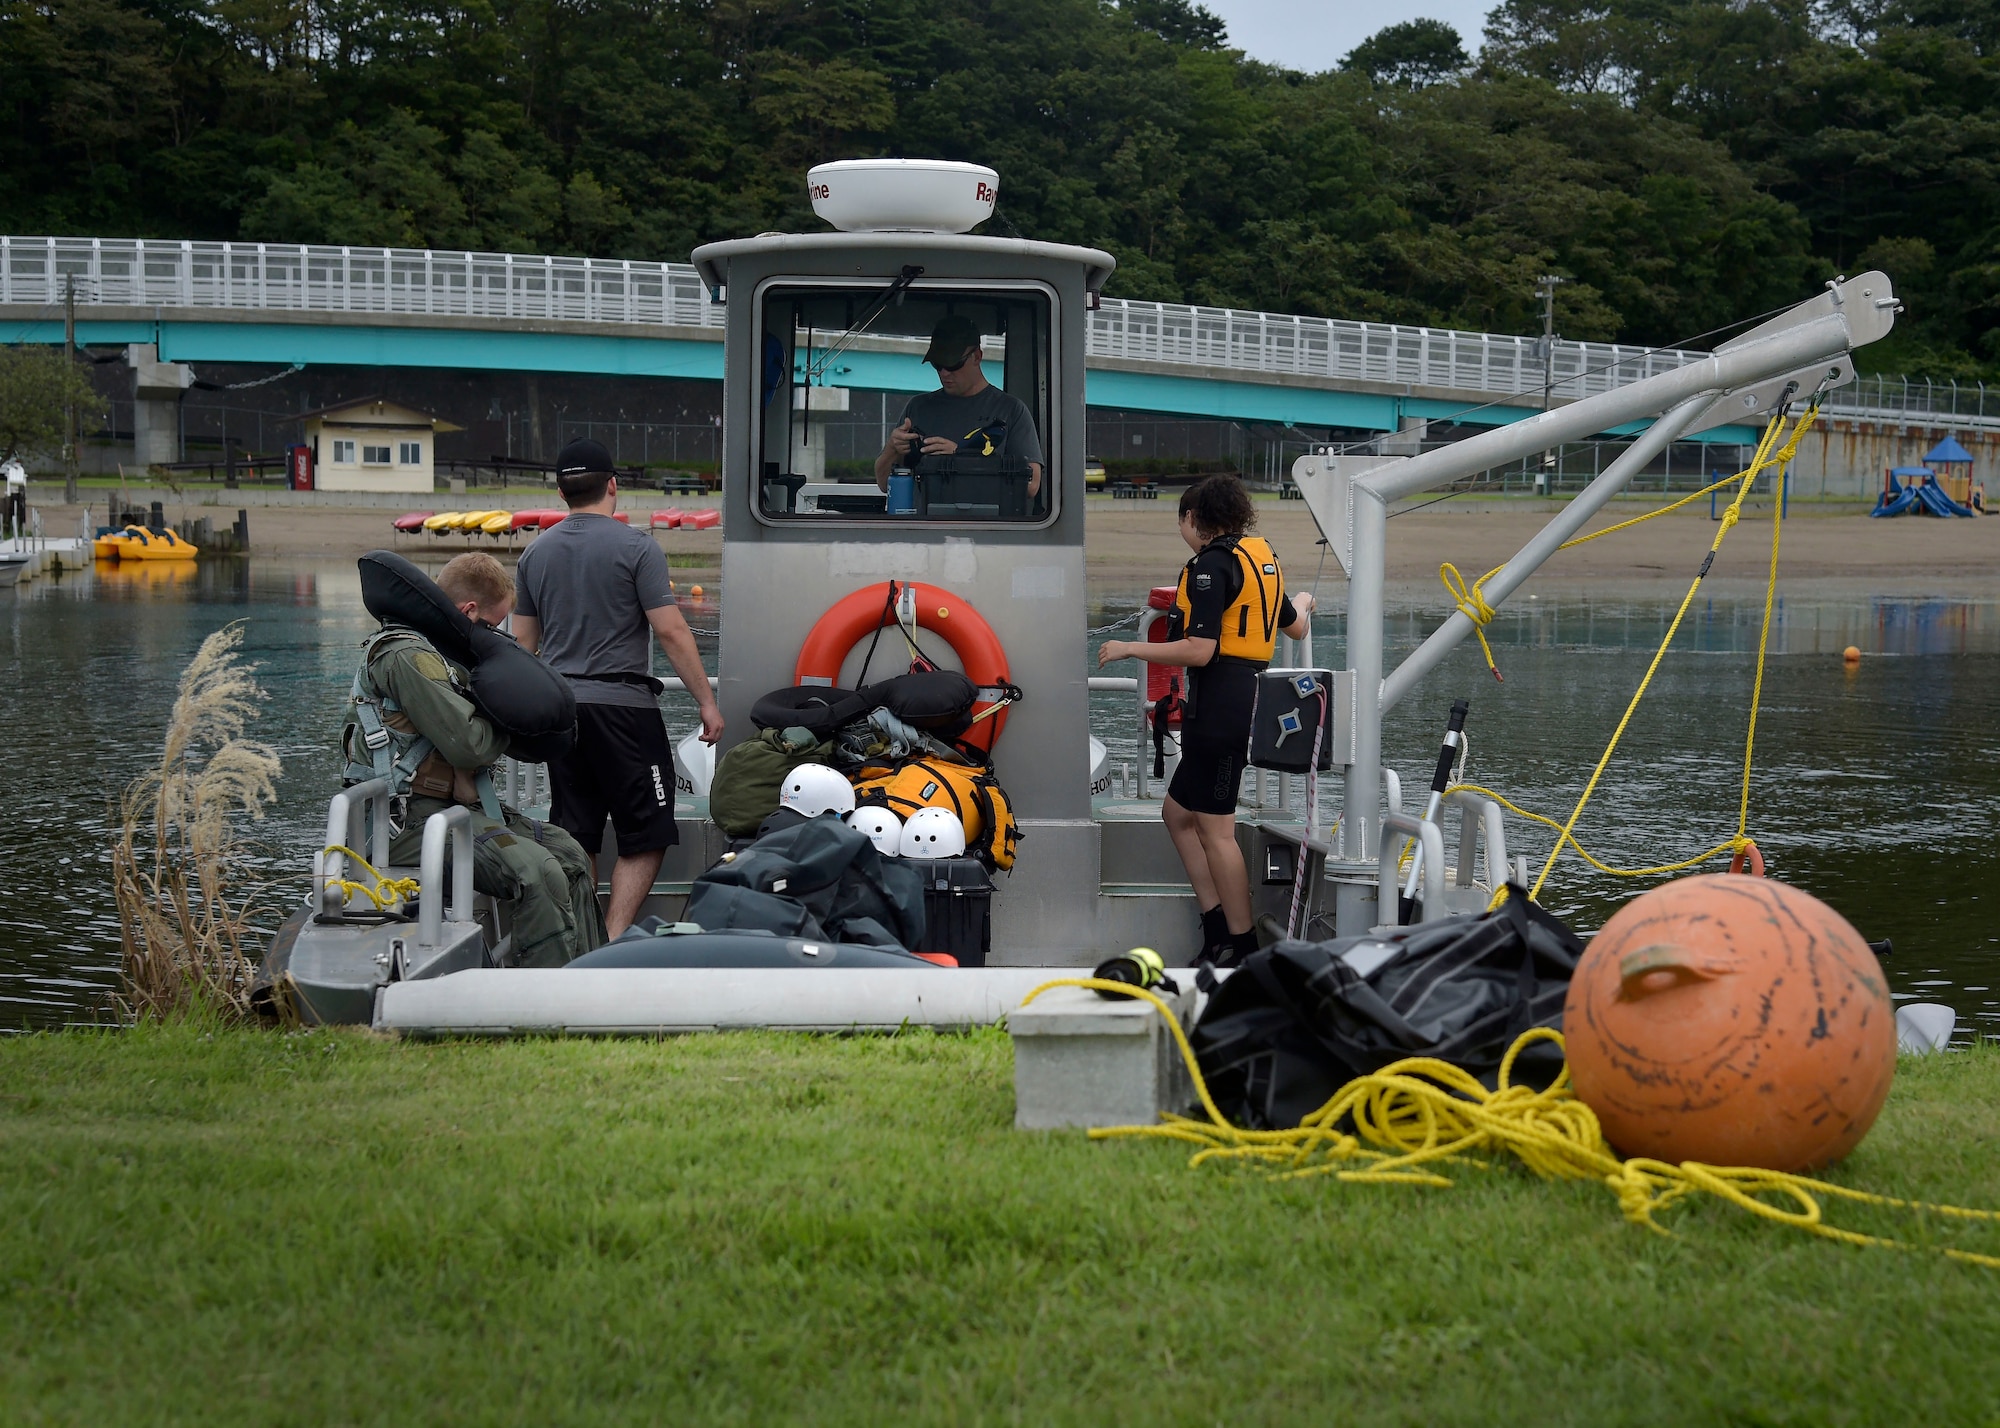 Survival, Evasion, Resistance, and Escape specialists and cadre members prepare the USS Magnum, a training boat, on Lake Ogawara before beginning the practical part of the water survival refresher course, at Misawa Air Base, Japan, Sept. 20, 2016. During the course, 35th Fighter Wing pilots undergo an hour of academic learning to discuss their kits in an open water environment, then demonstrate practical lessons in the water. (U.S. Air Force photo by Senior Airman Deana Heitzman)